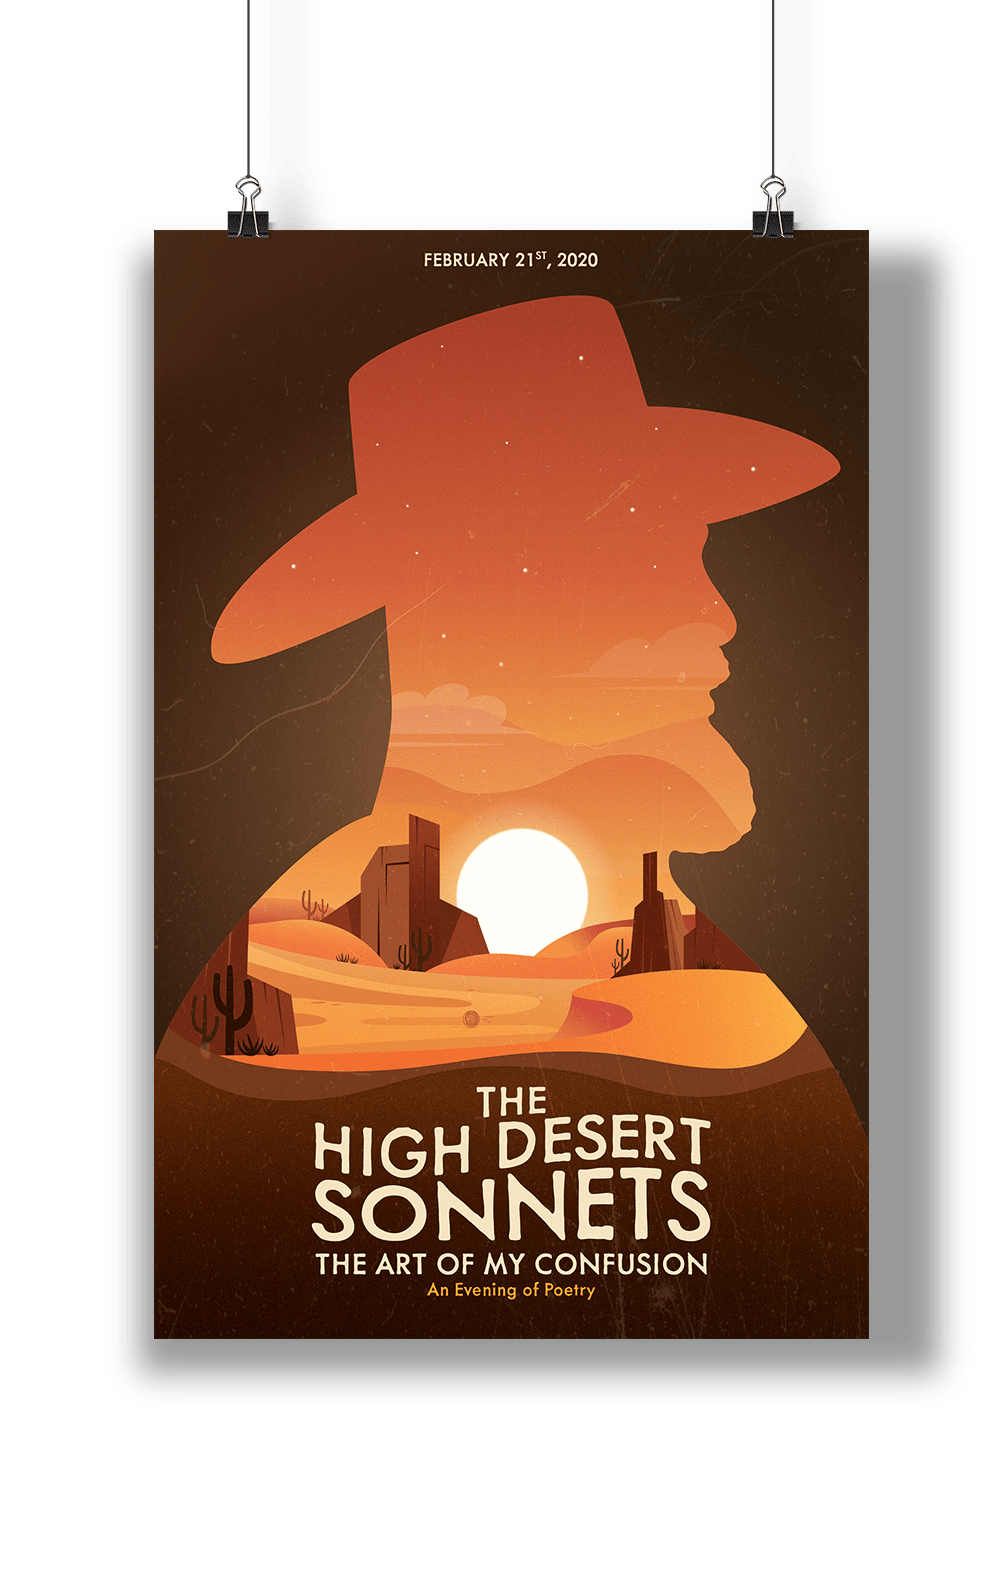 An illustrated poster with a desert framed by the silhouette of a man wearing a cowboy hat.